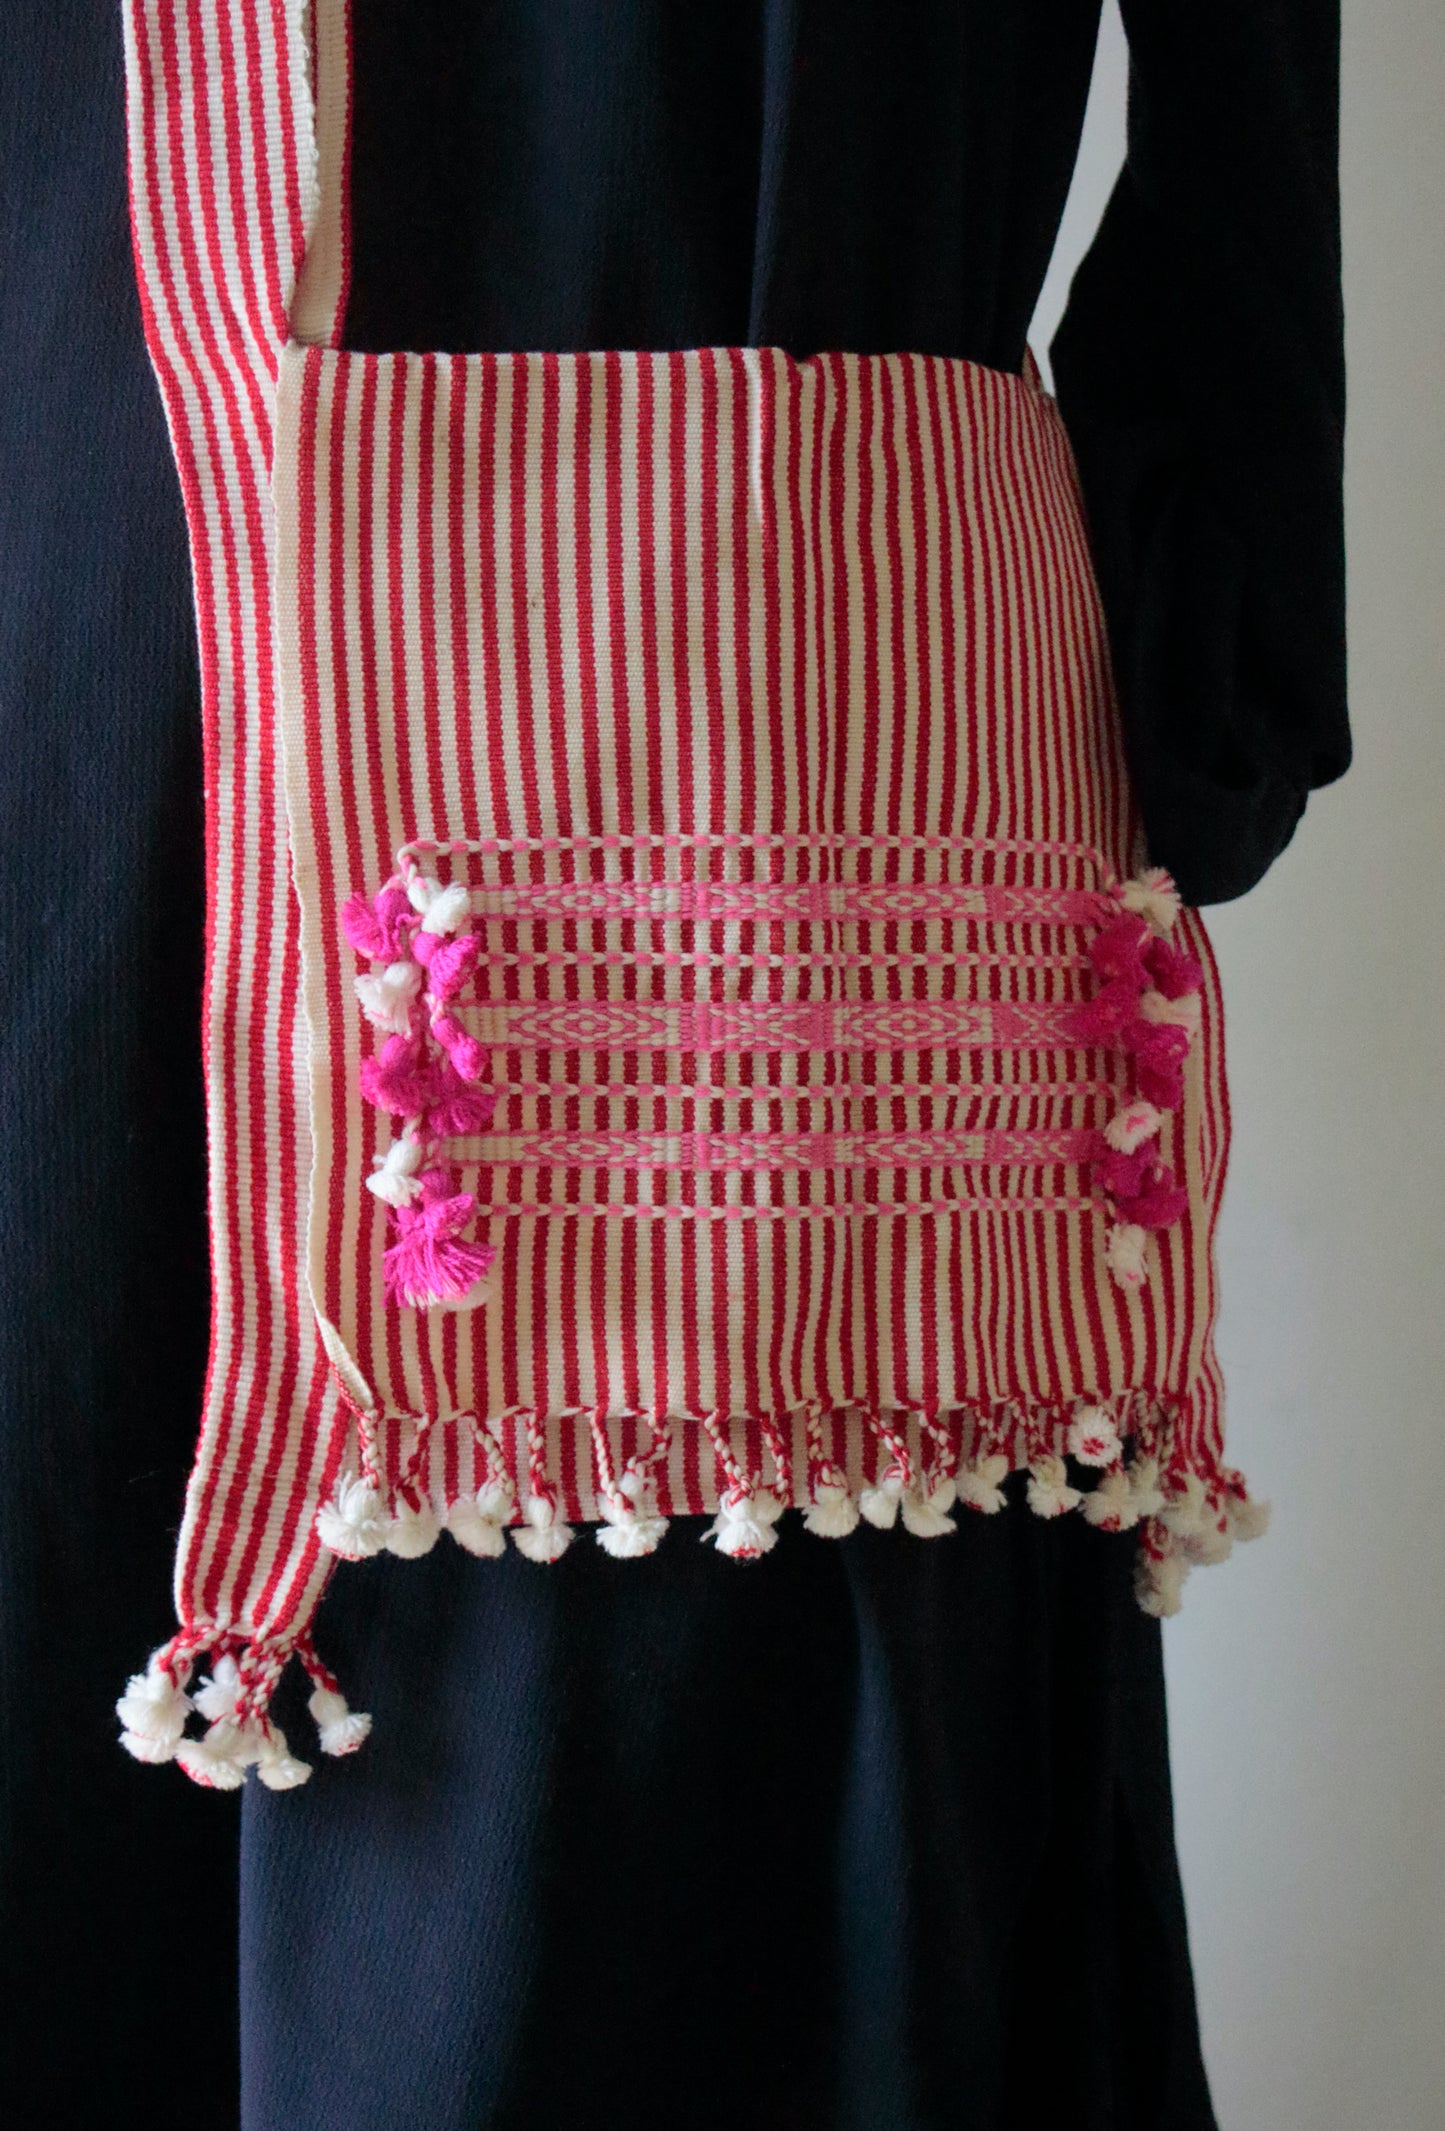 Artisanal Sling Bags made from Handwoven fabrics